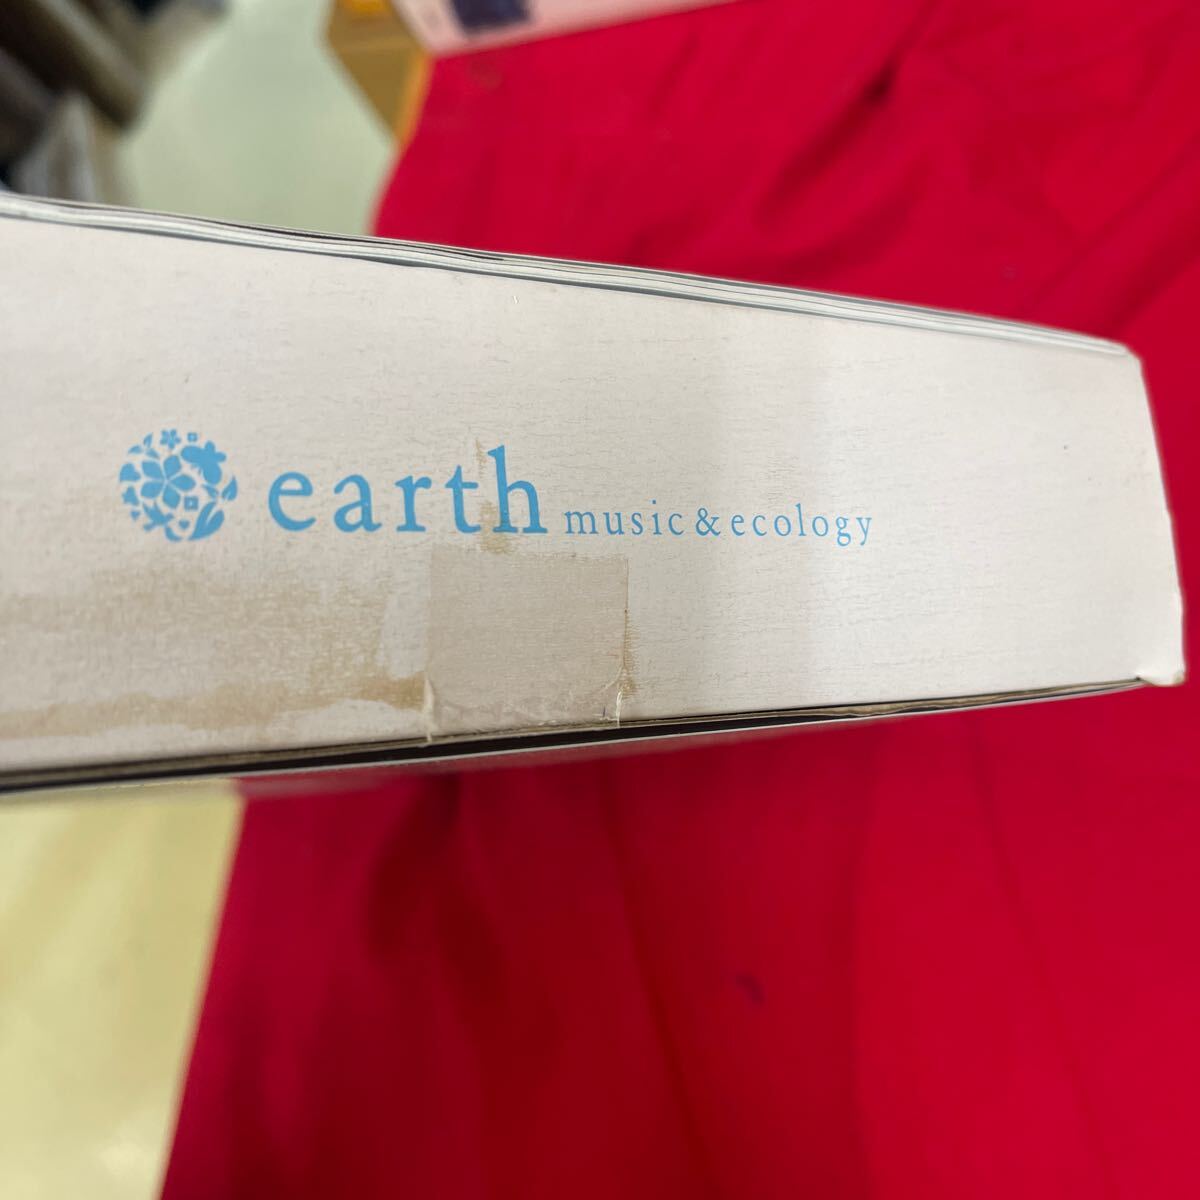 Y501. 32. earth music＆ecology BACKPACK BOOK （e-MOOK 宝島社ブランドムック）. 未開封　保管品　外箱　歪み　潰れあり_画像8